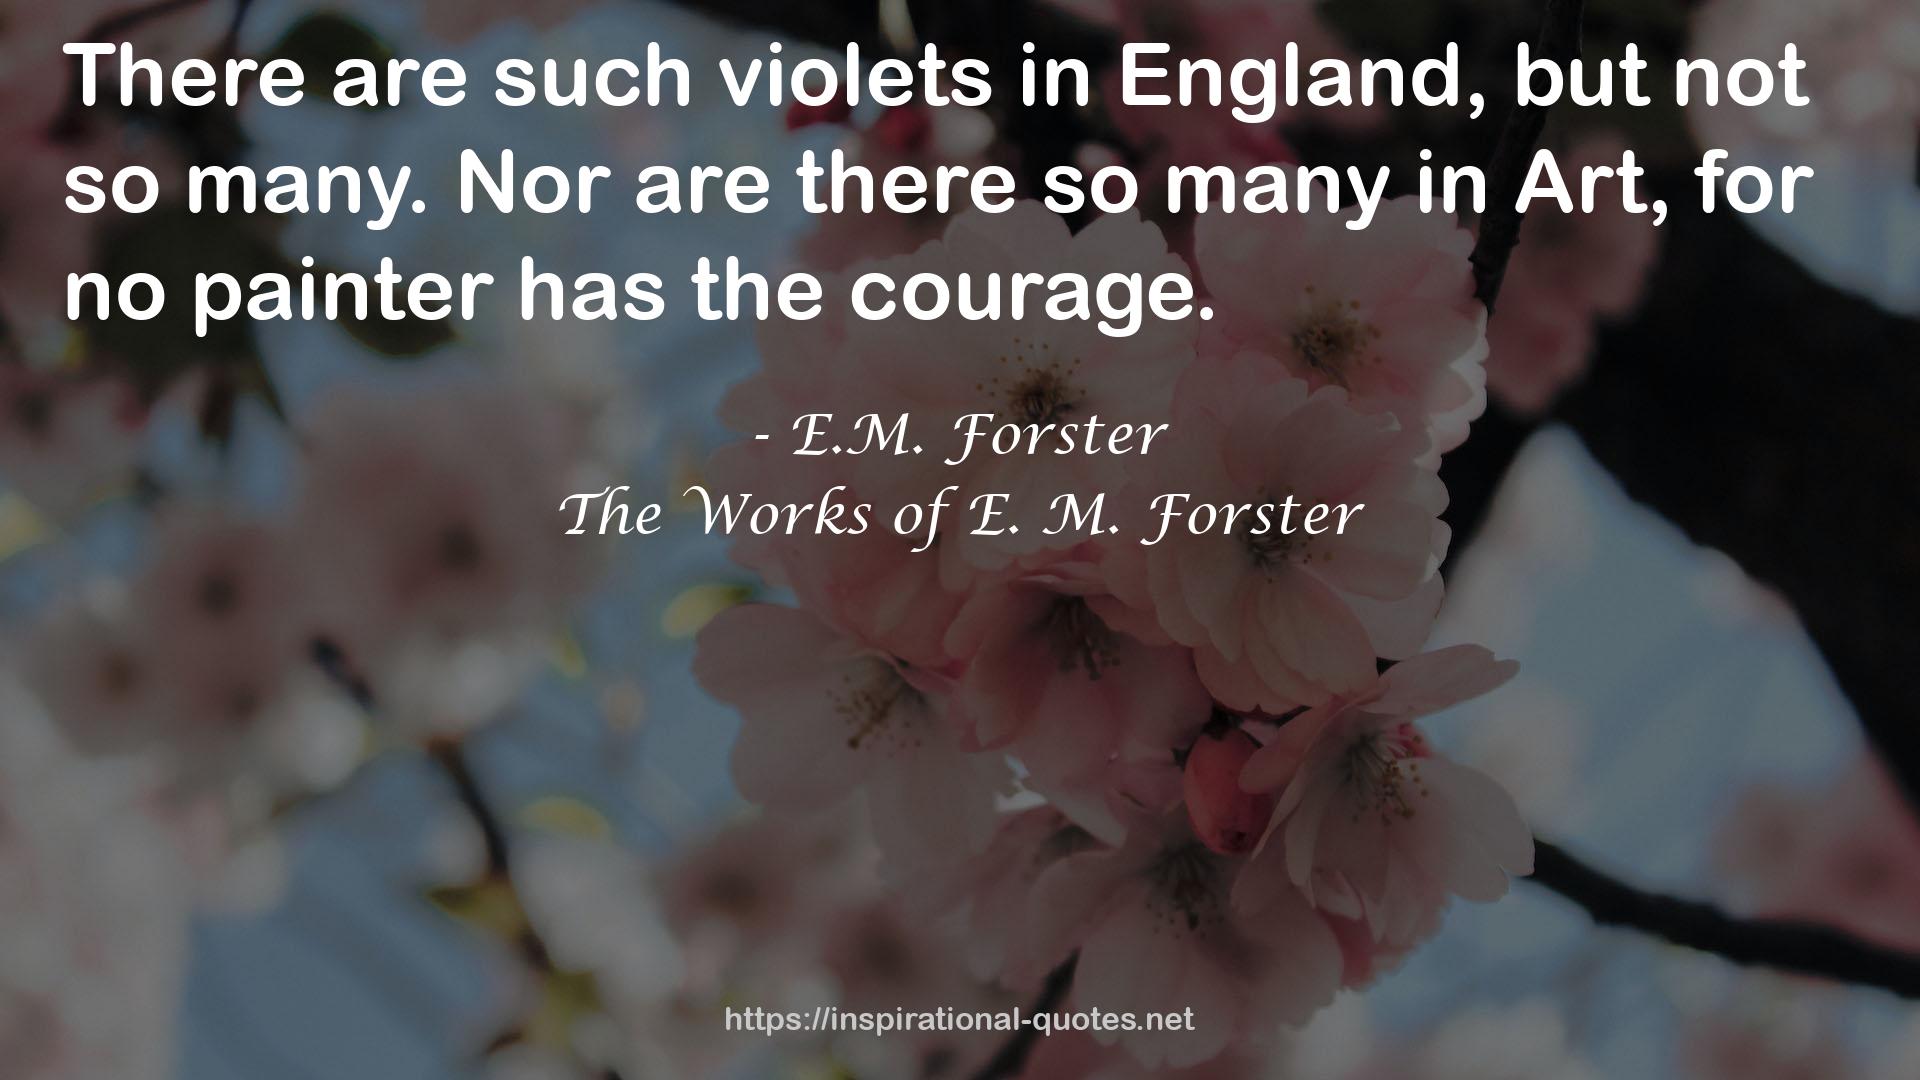 The Works of E. M. Forster QUOTES